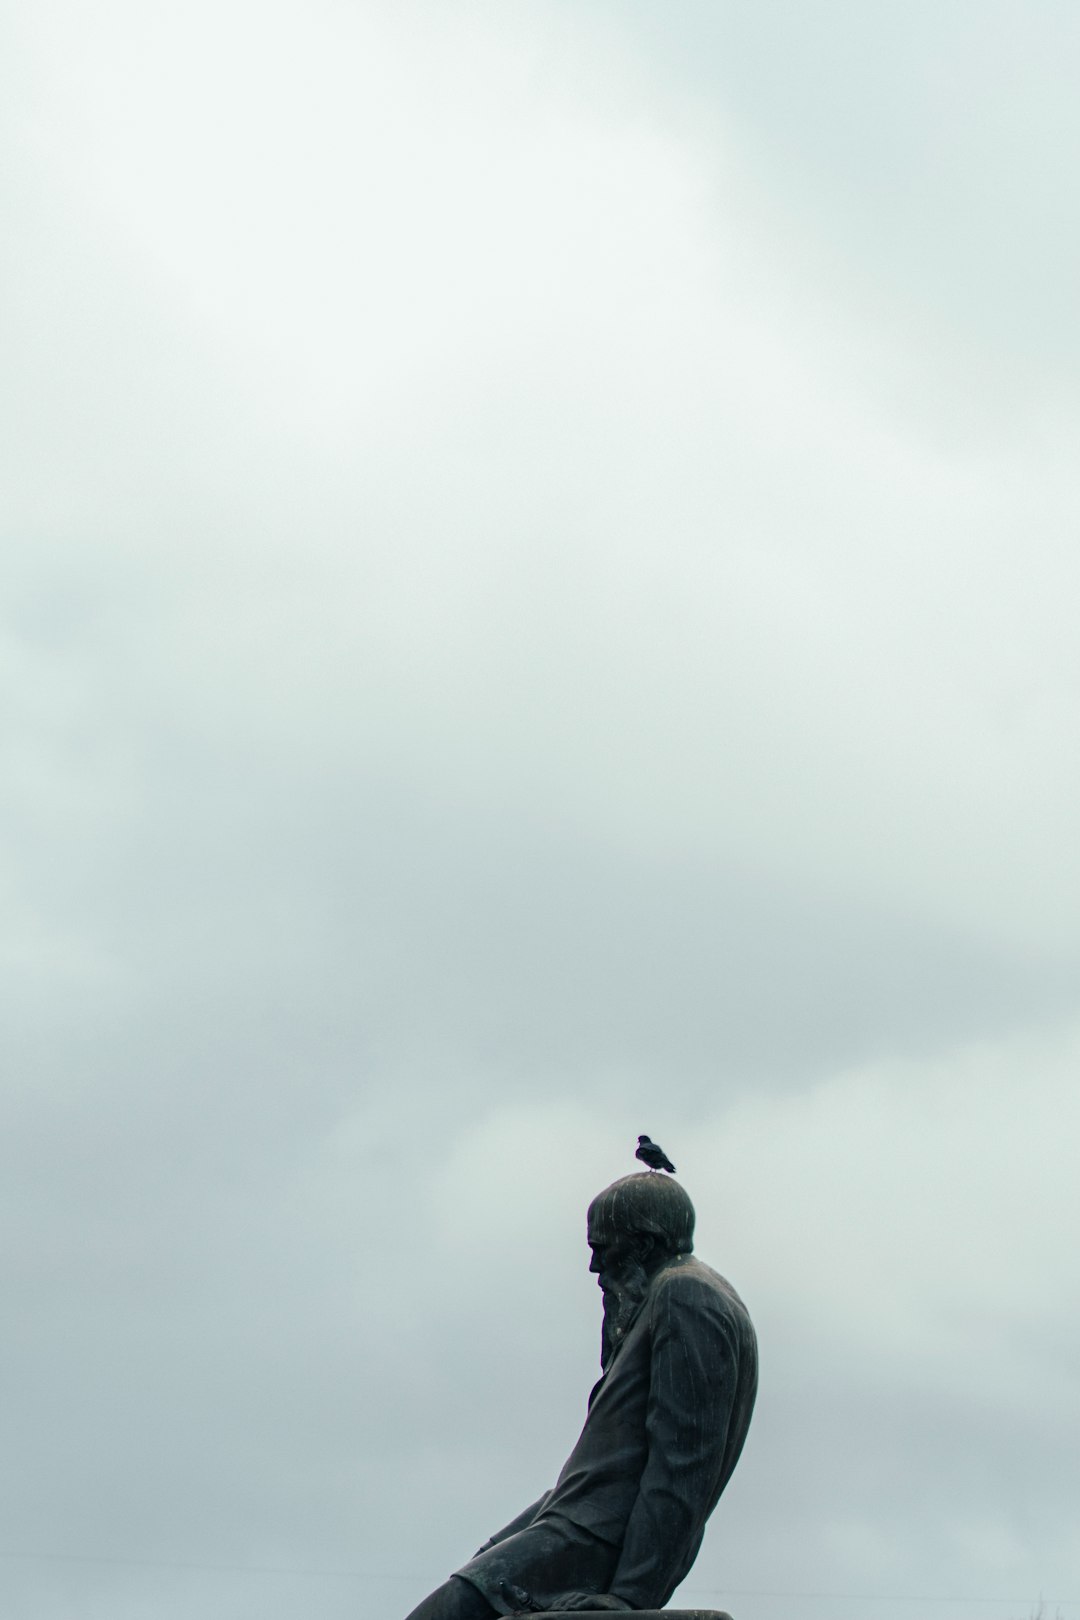 man in black jacket standing under white cloudy sky during daytime